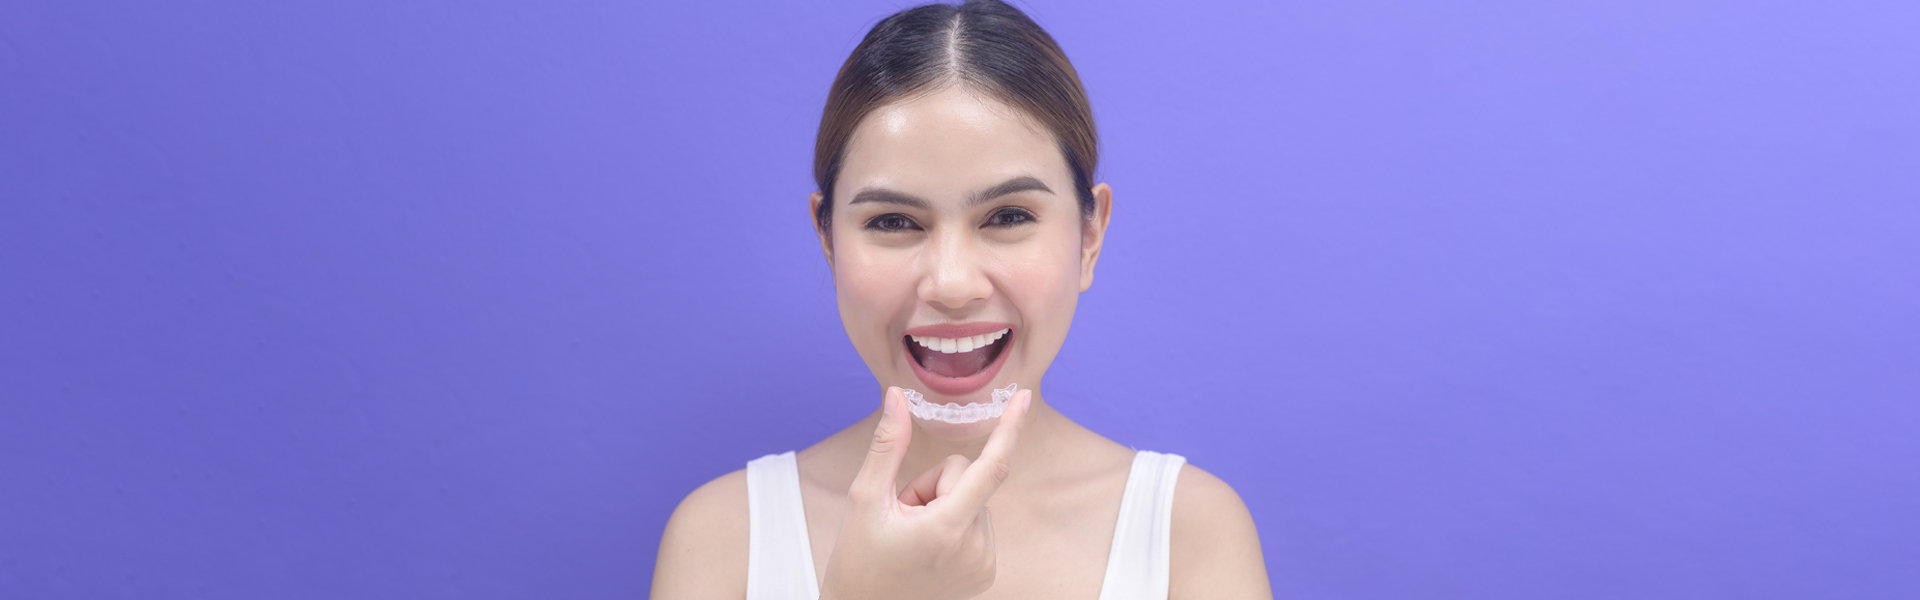 How To Choose The Best Invisalign Provider In Spring, TX